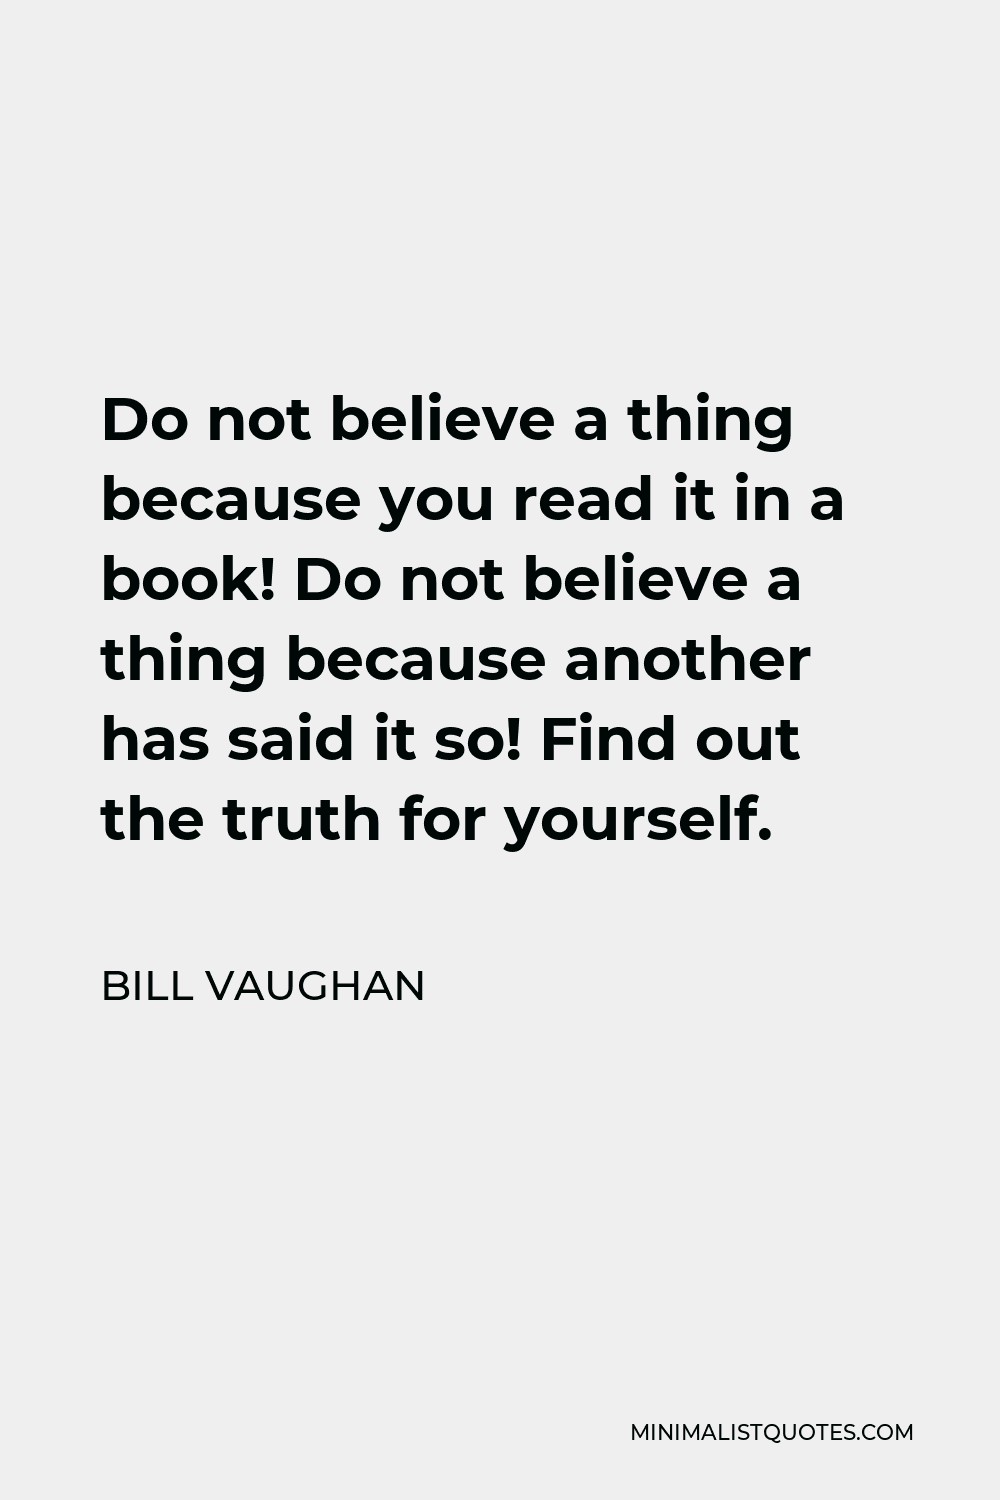 Bill Vaughan Quote - Do not believe a thing because you read it in a book! Do not believe a thing because another has said it so! Find out the truth for yourself.